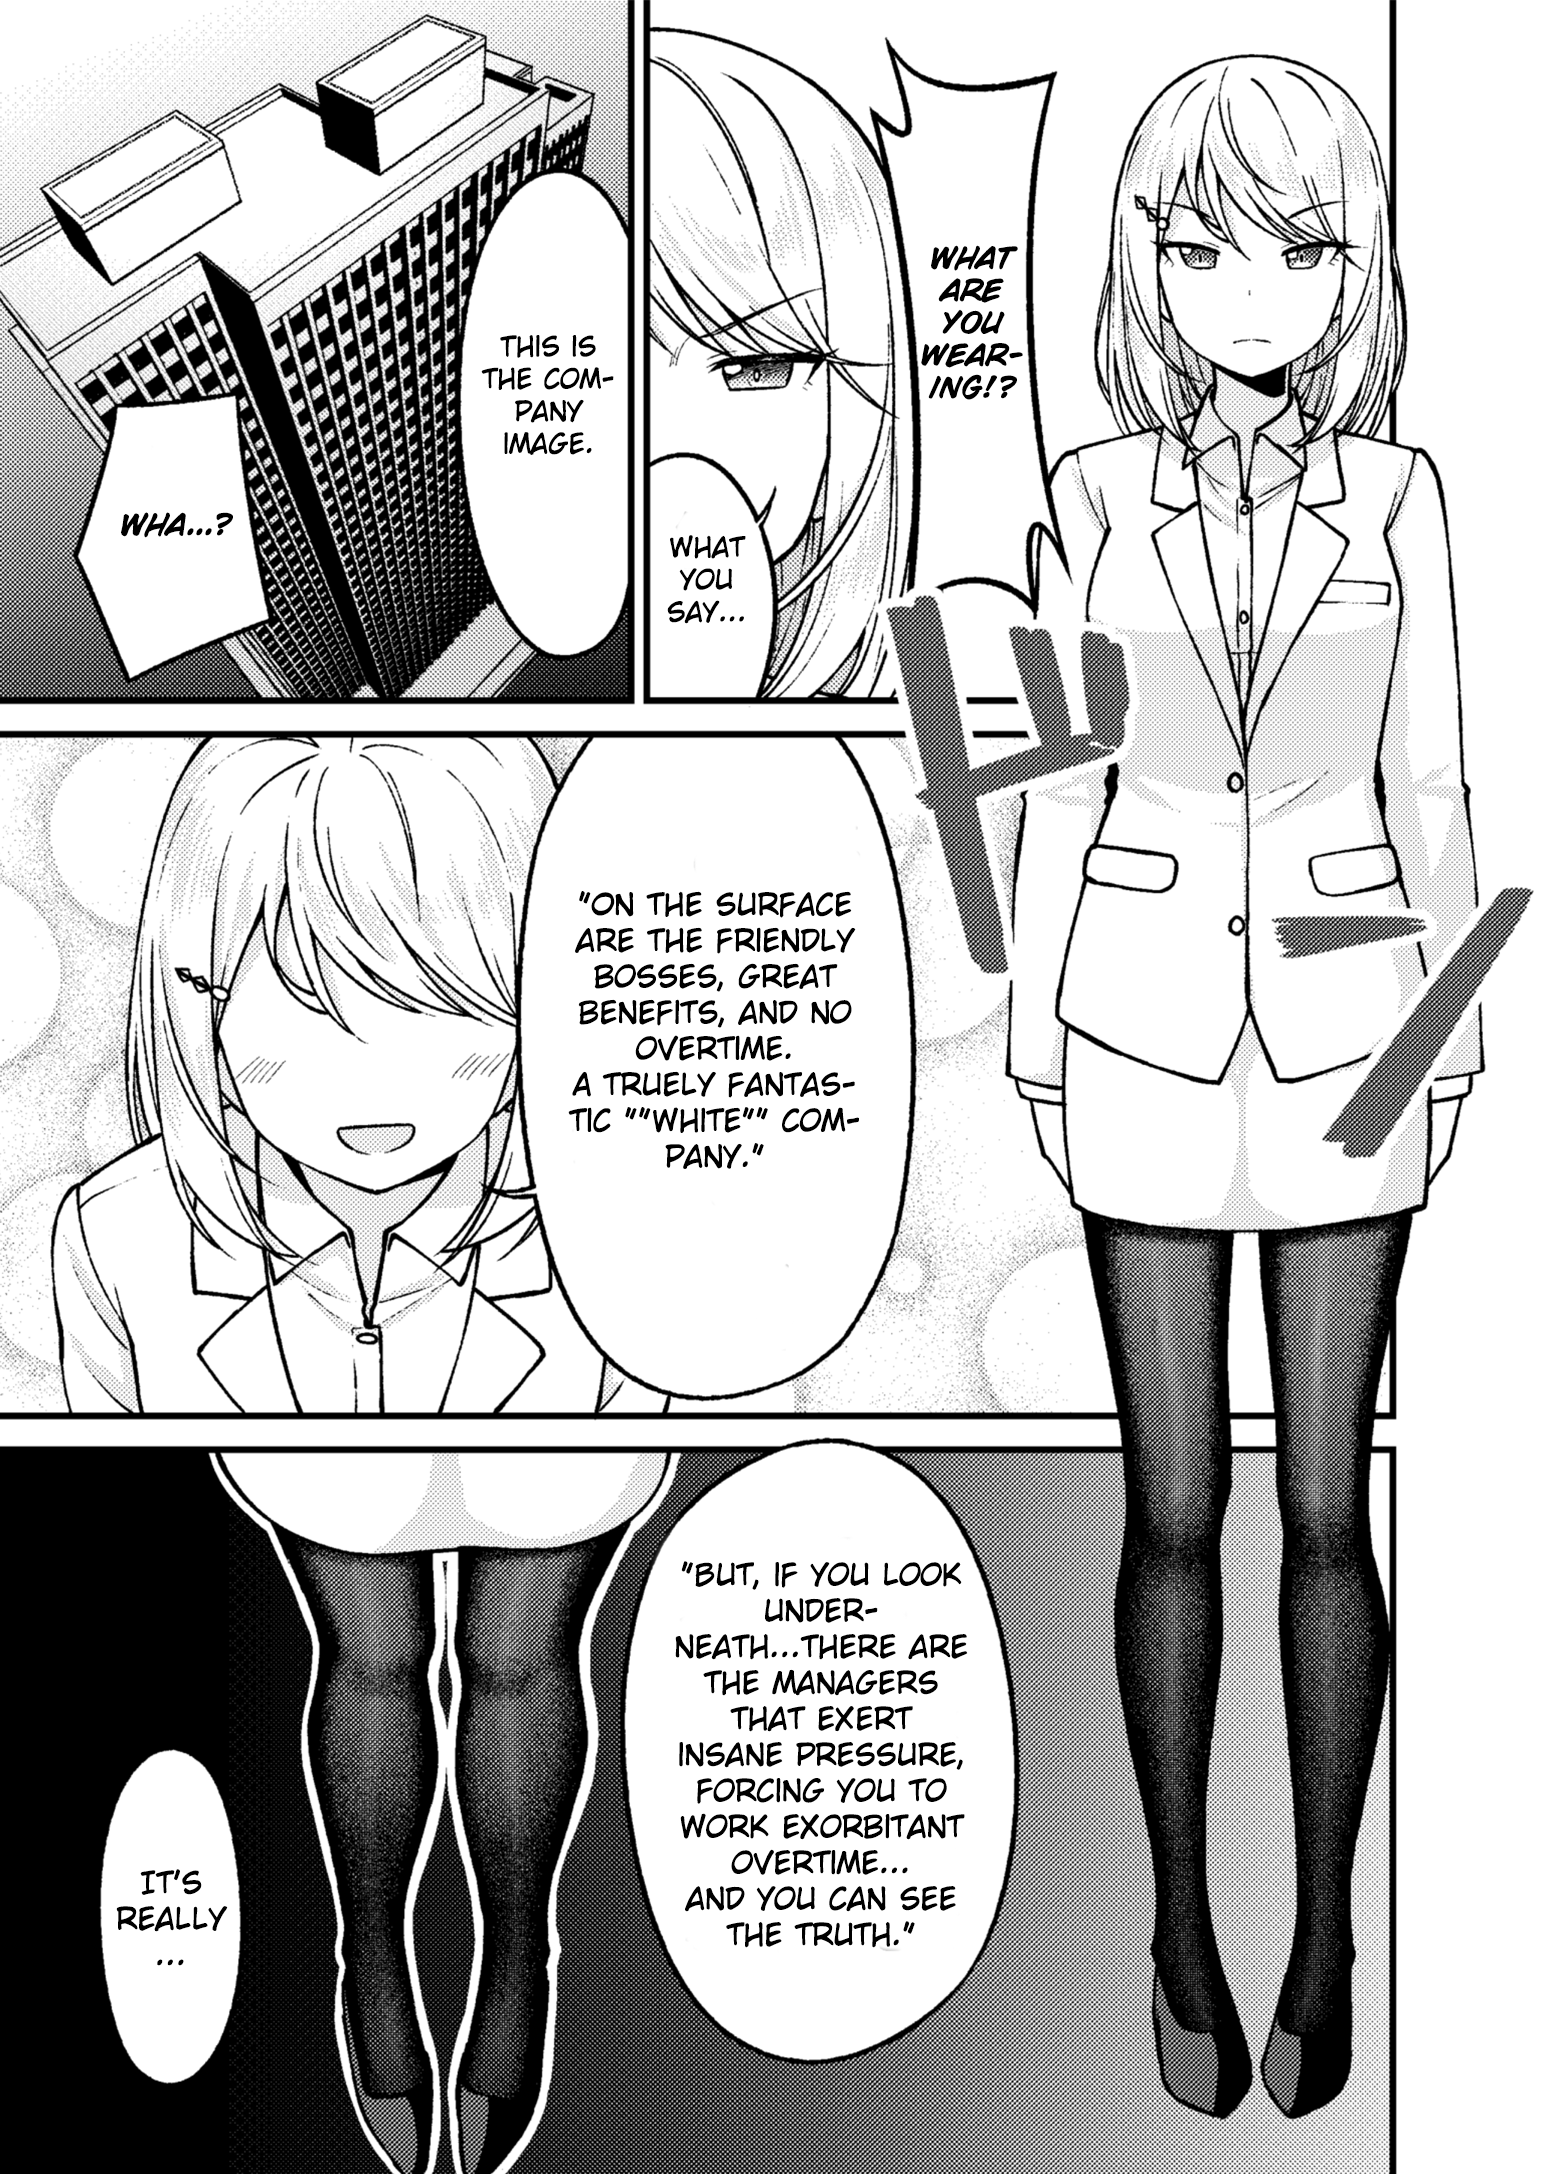 A Wife Who Heals With Tights - Page 3